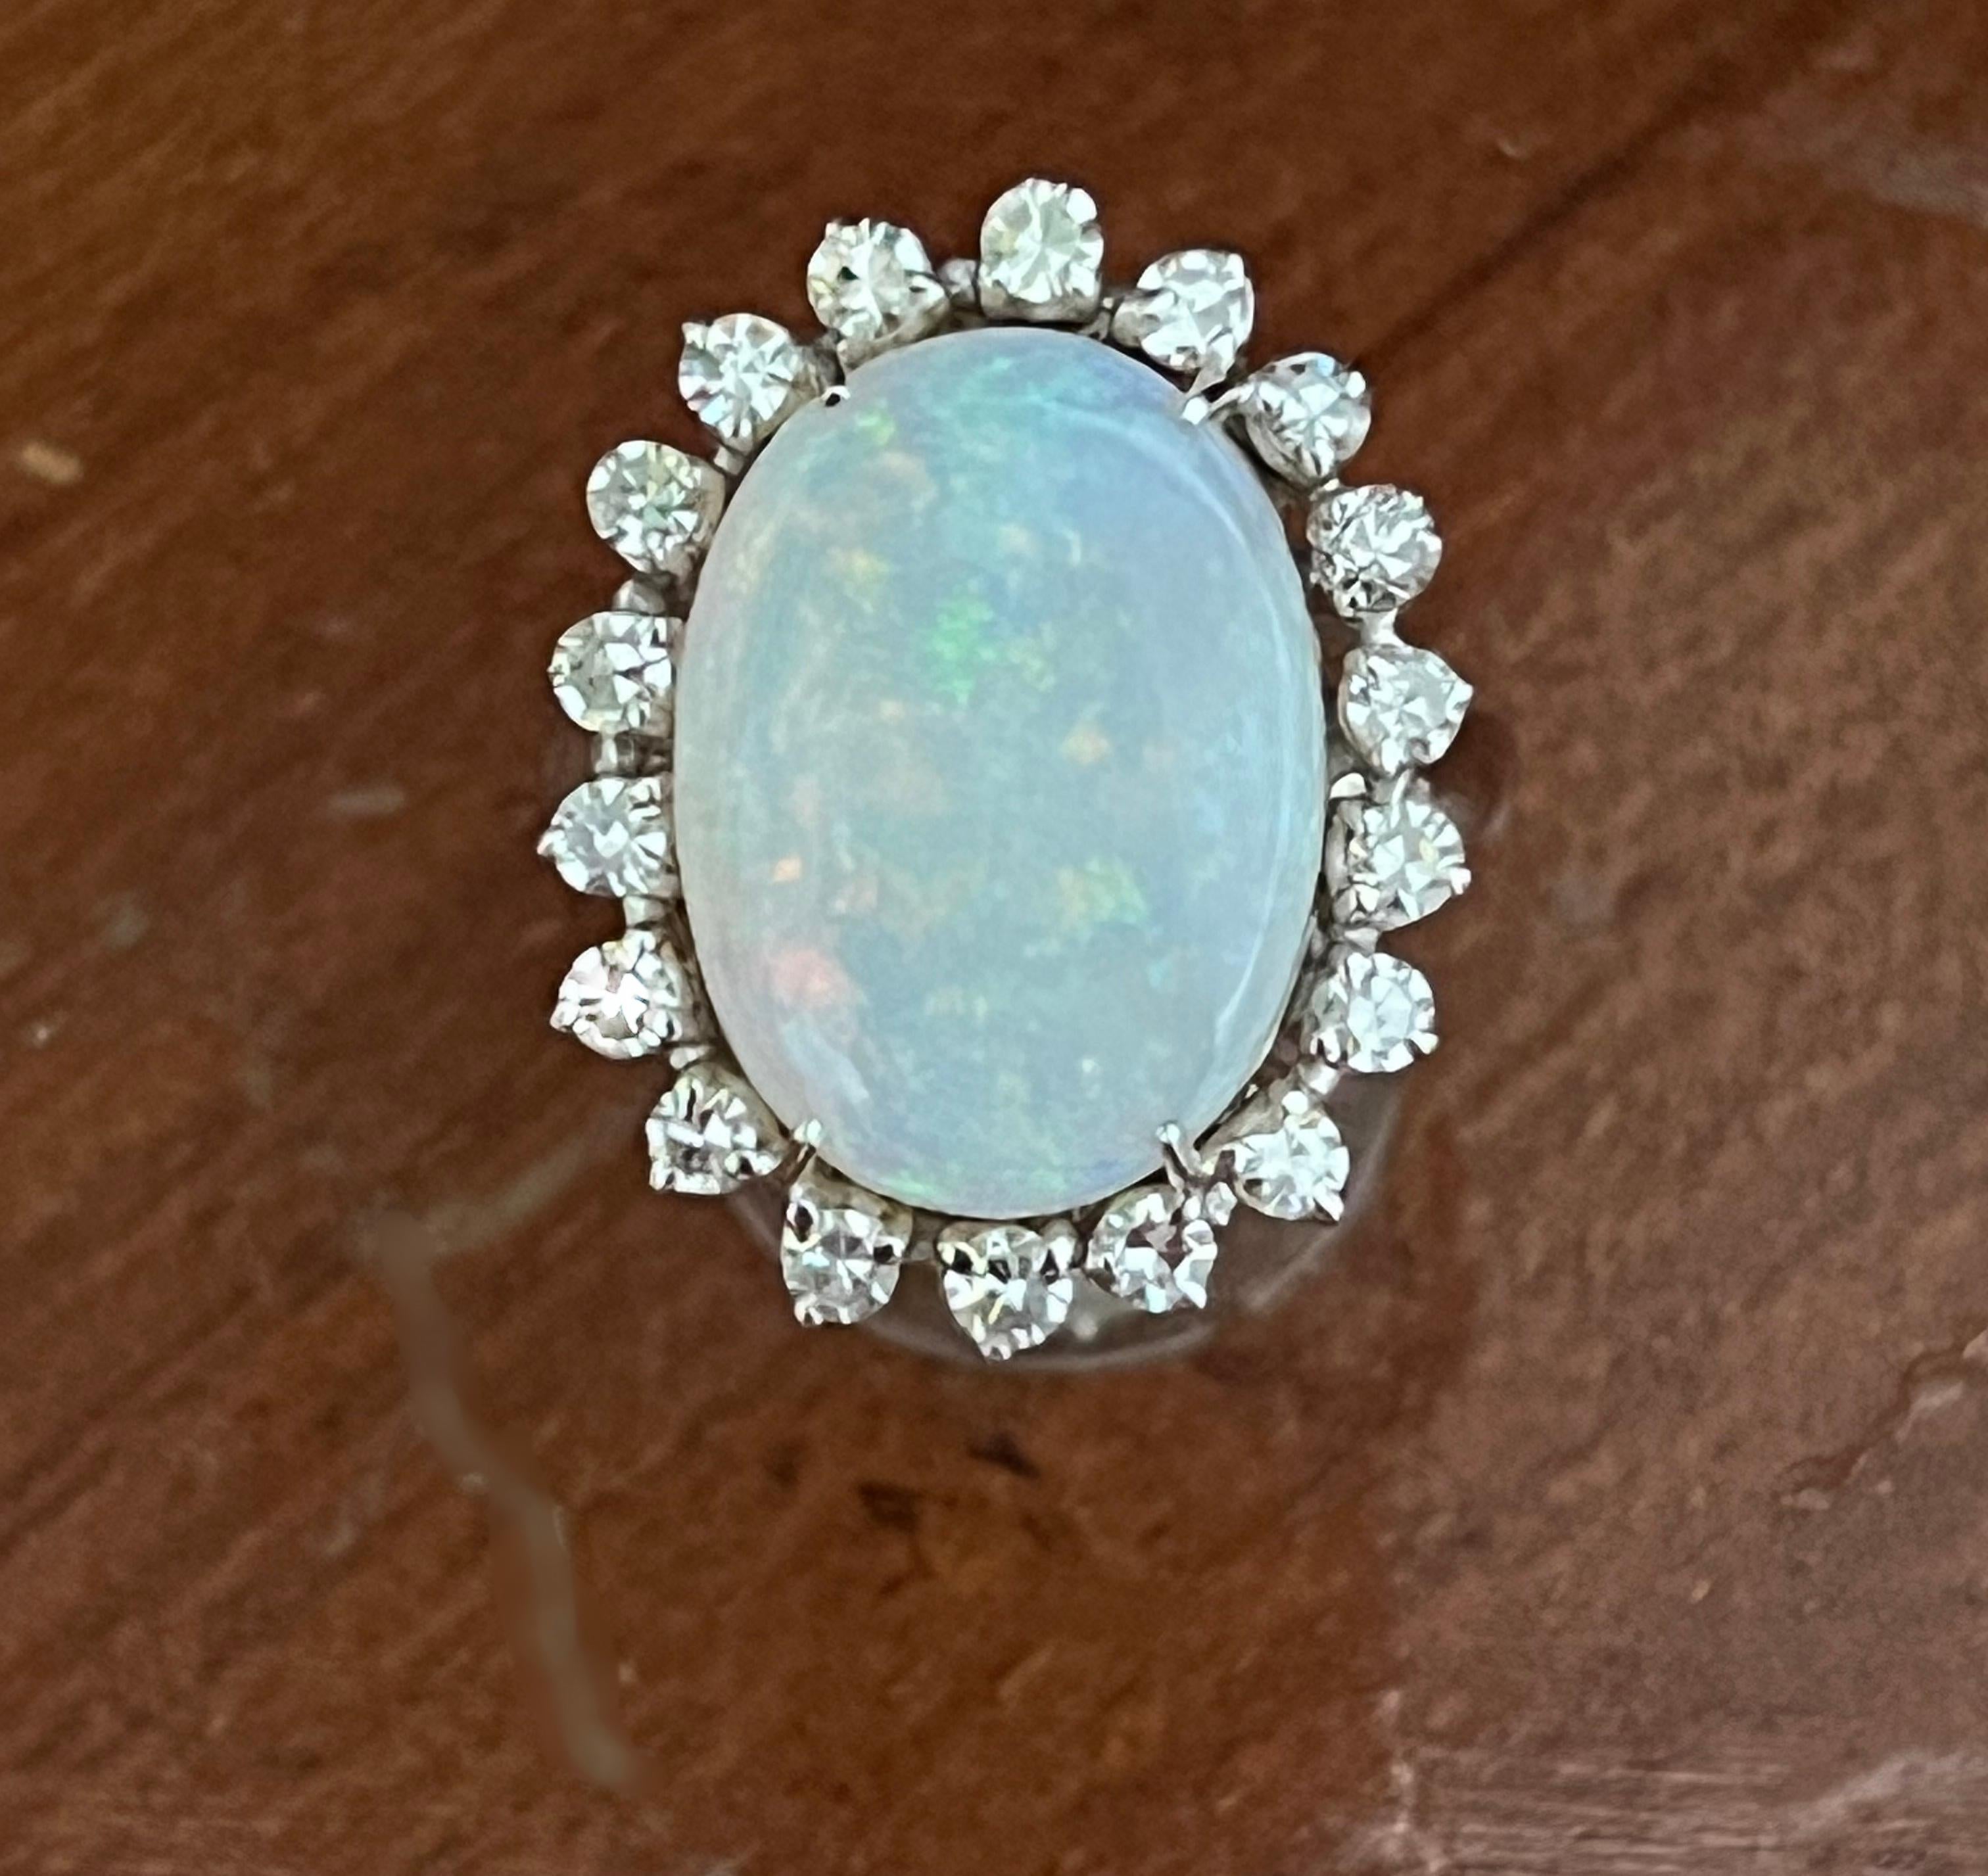 Amazing 18 Karat white gold cocktail ring. Handmade by our craftsmen and assembled with Australian opal and diamonds.

Diamonds weight 0.80 karat
Opal weight 6.96 karat
Ring total weight 8.40 grams
Ring size ITA 16.50 - US 7.75
(all rings are can be